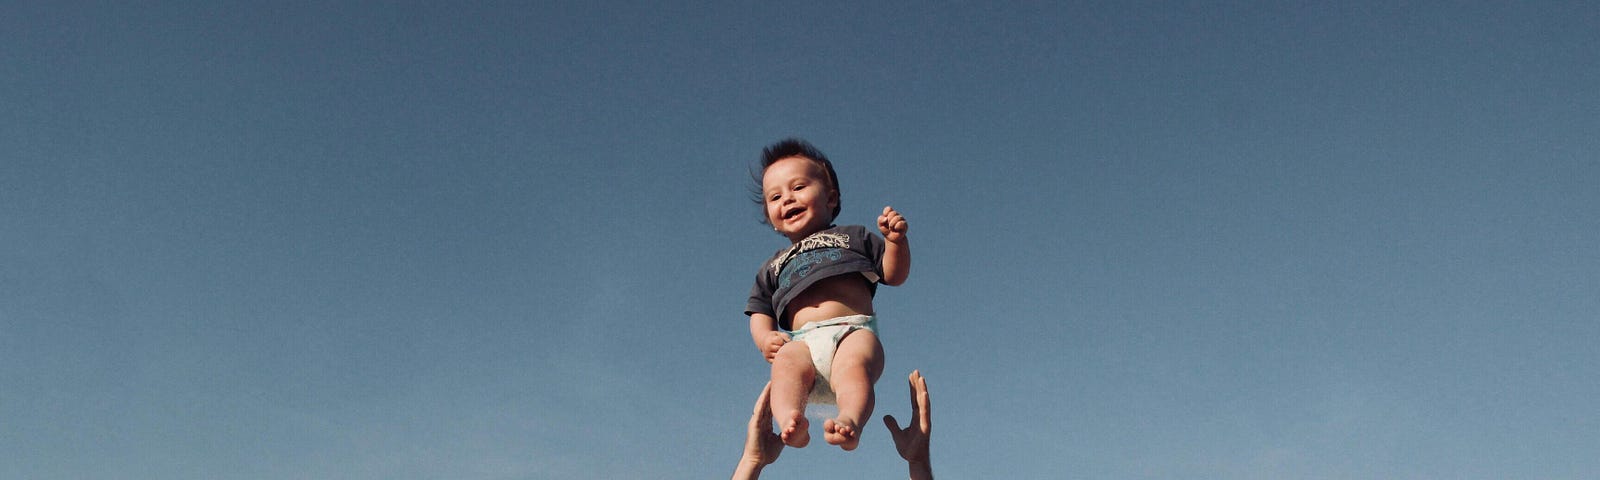 Blue sky back ground. Happy baby in mid-air as a man throws him up to catch him again.